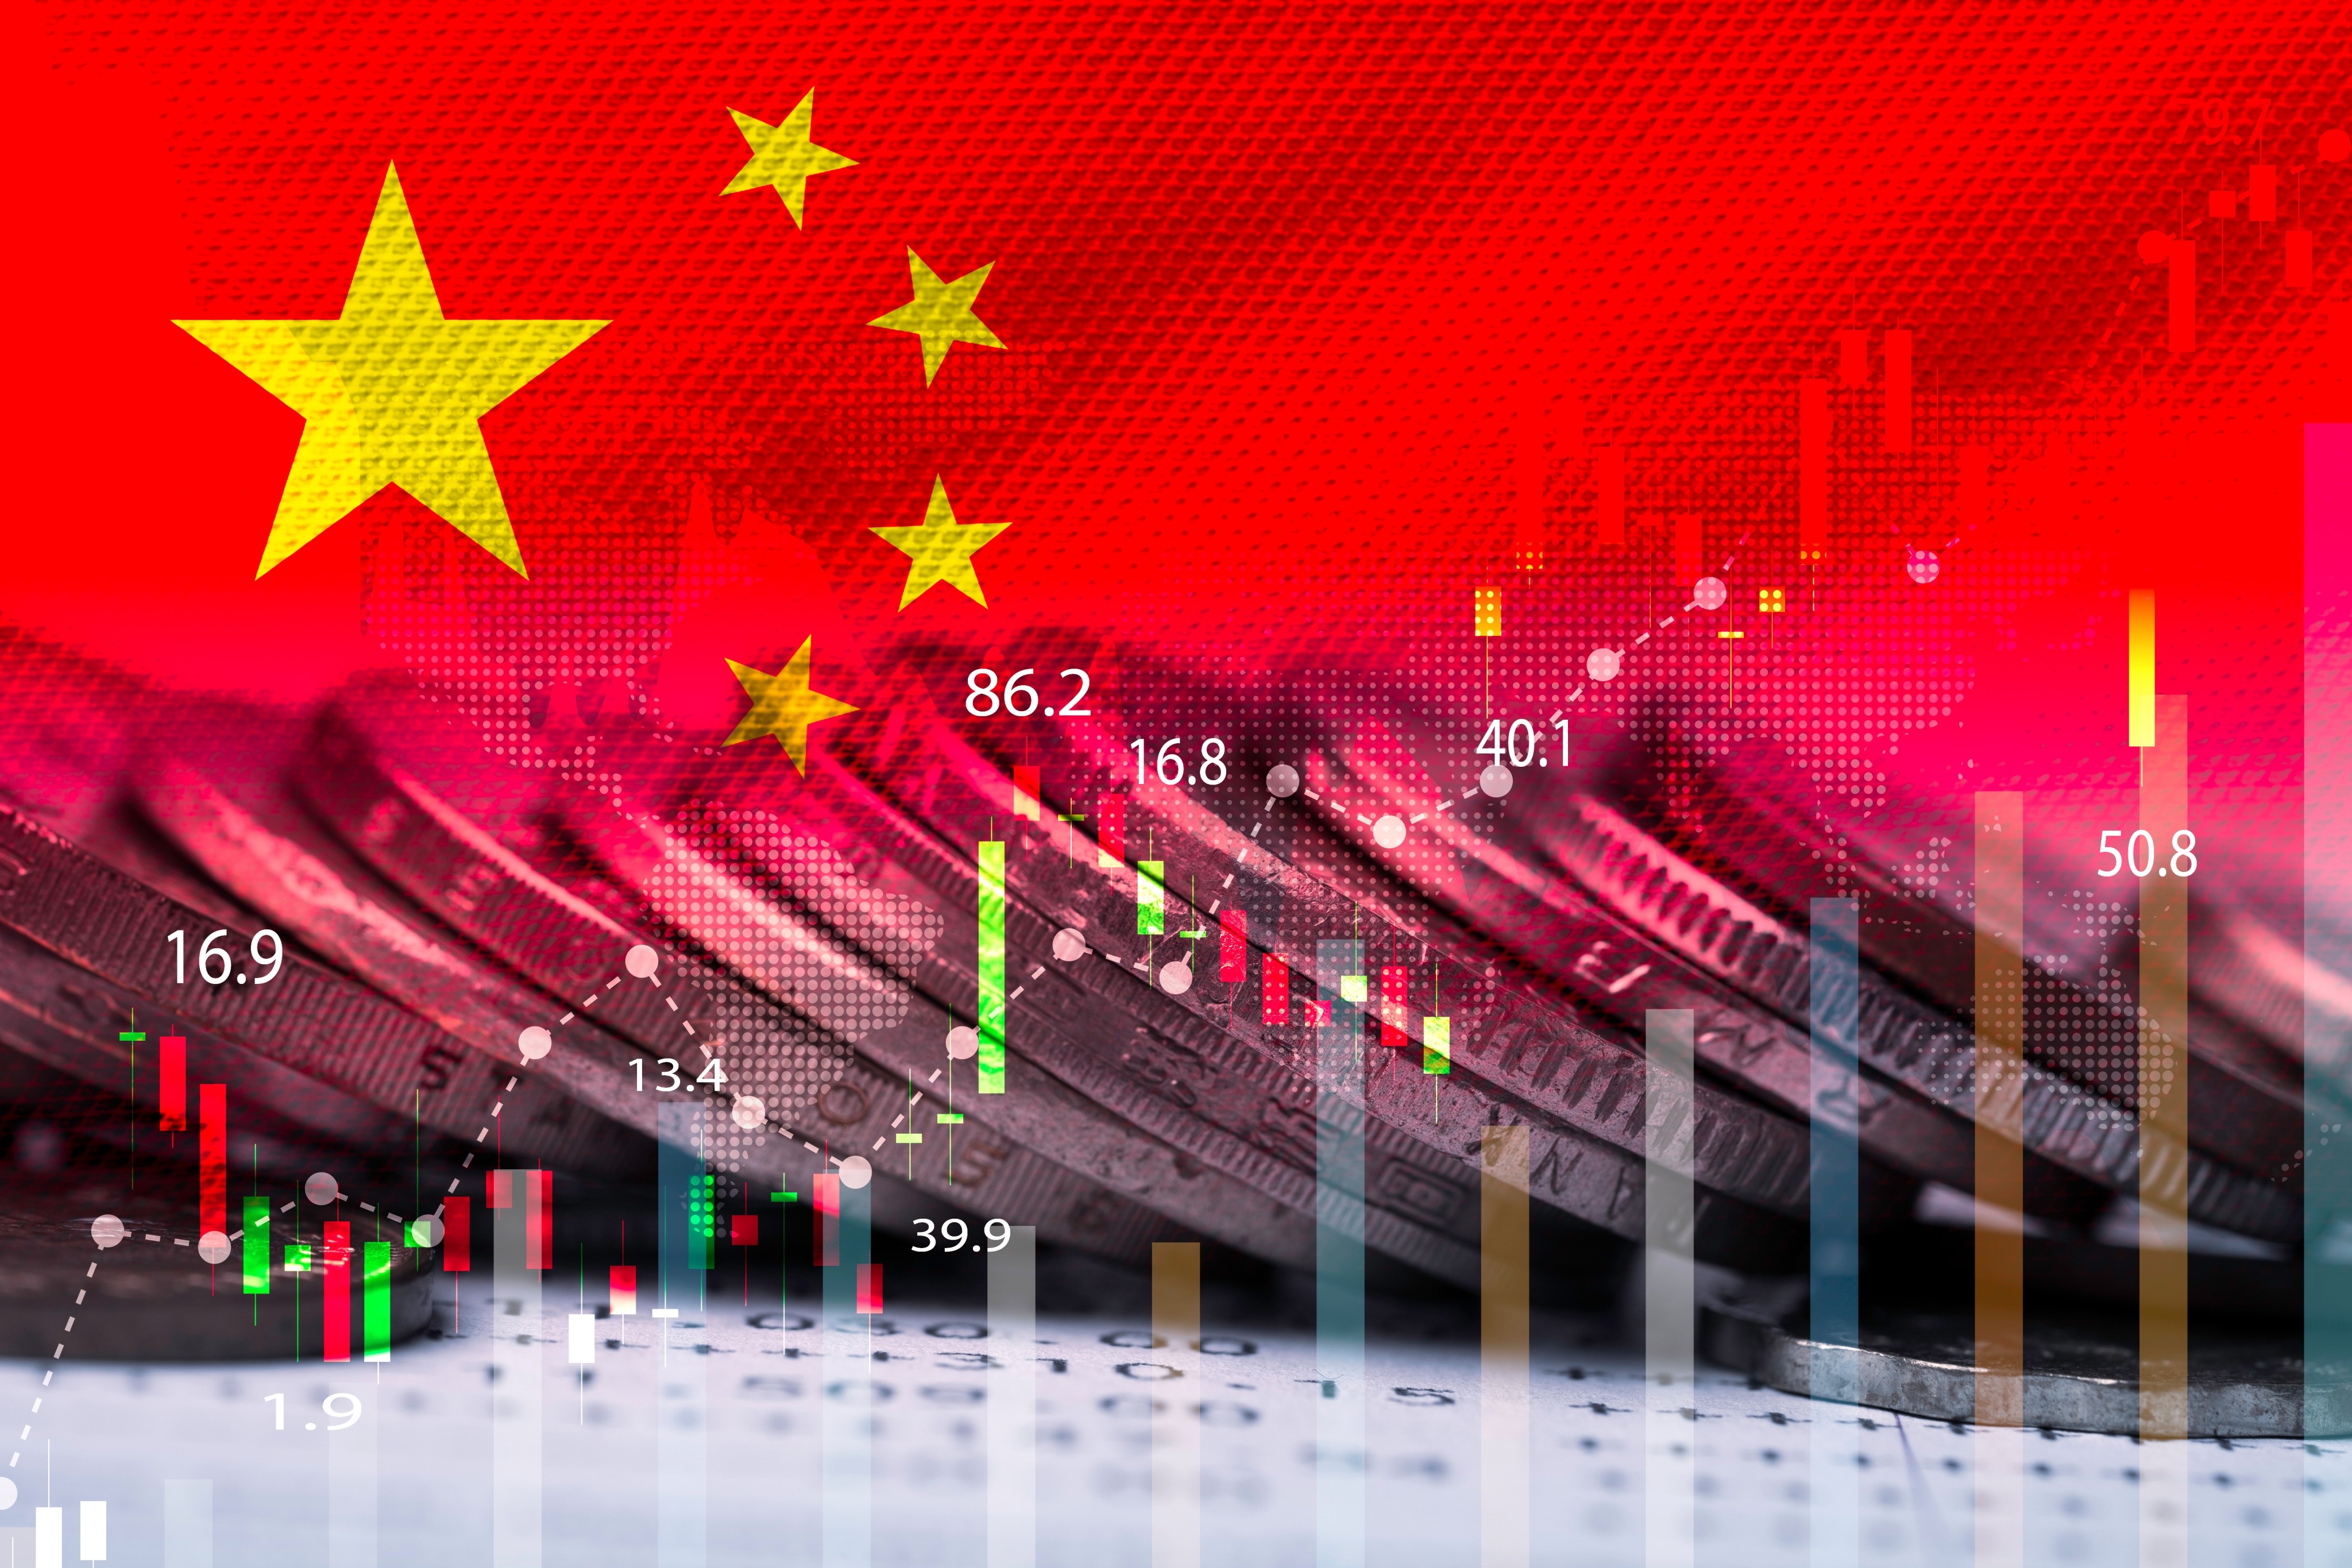 The sell-off in drug stocks intensified this week after a slew of headlines on busting industry corruption in China caught the attention of traders. Photo: Shutterstock